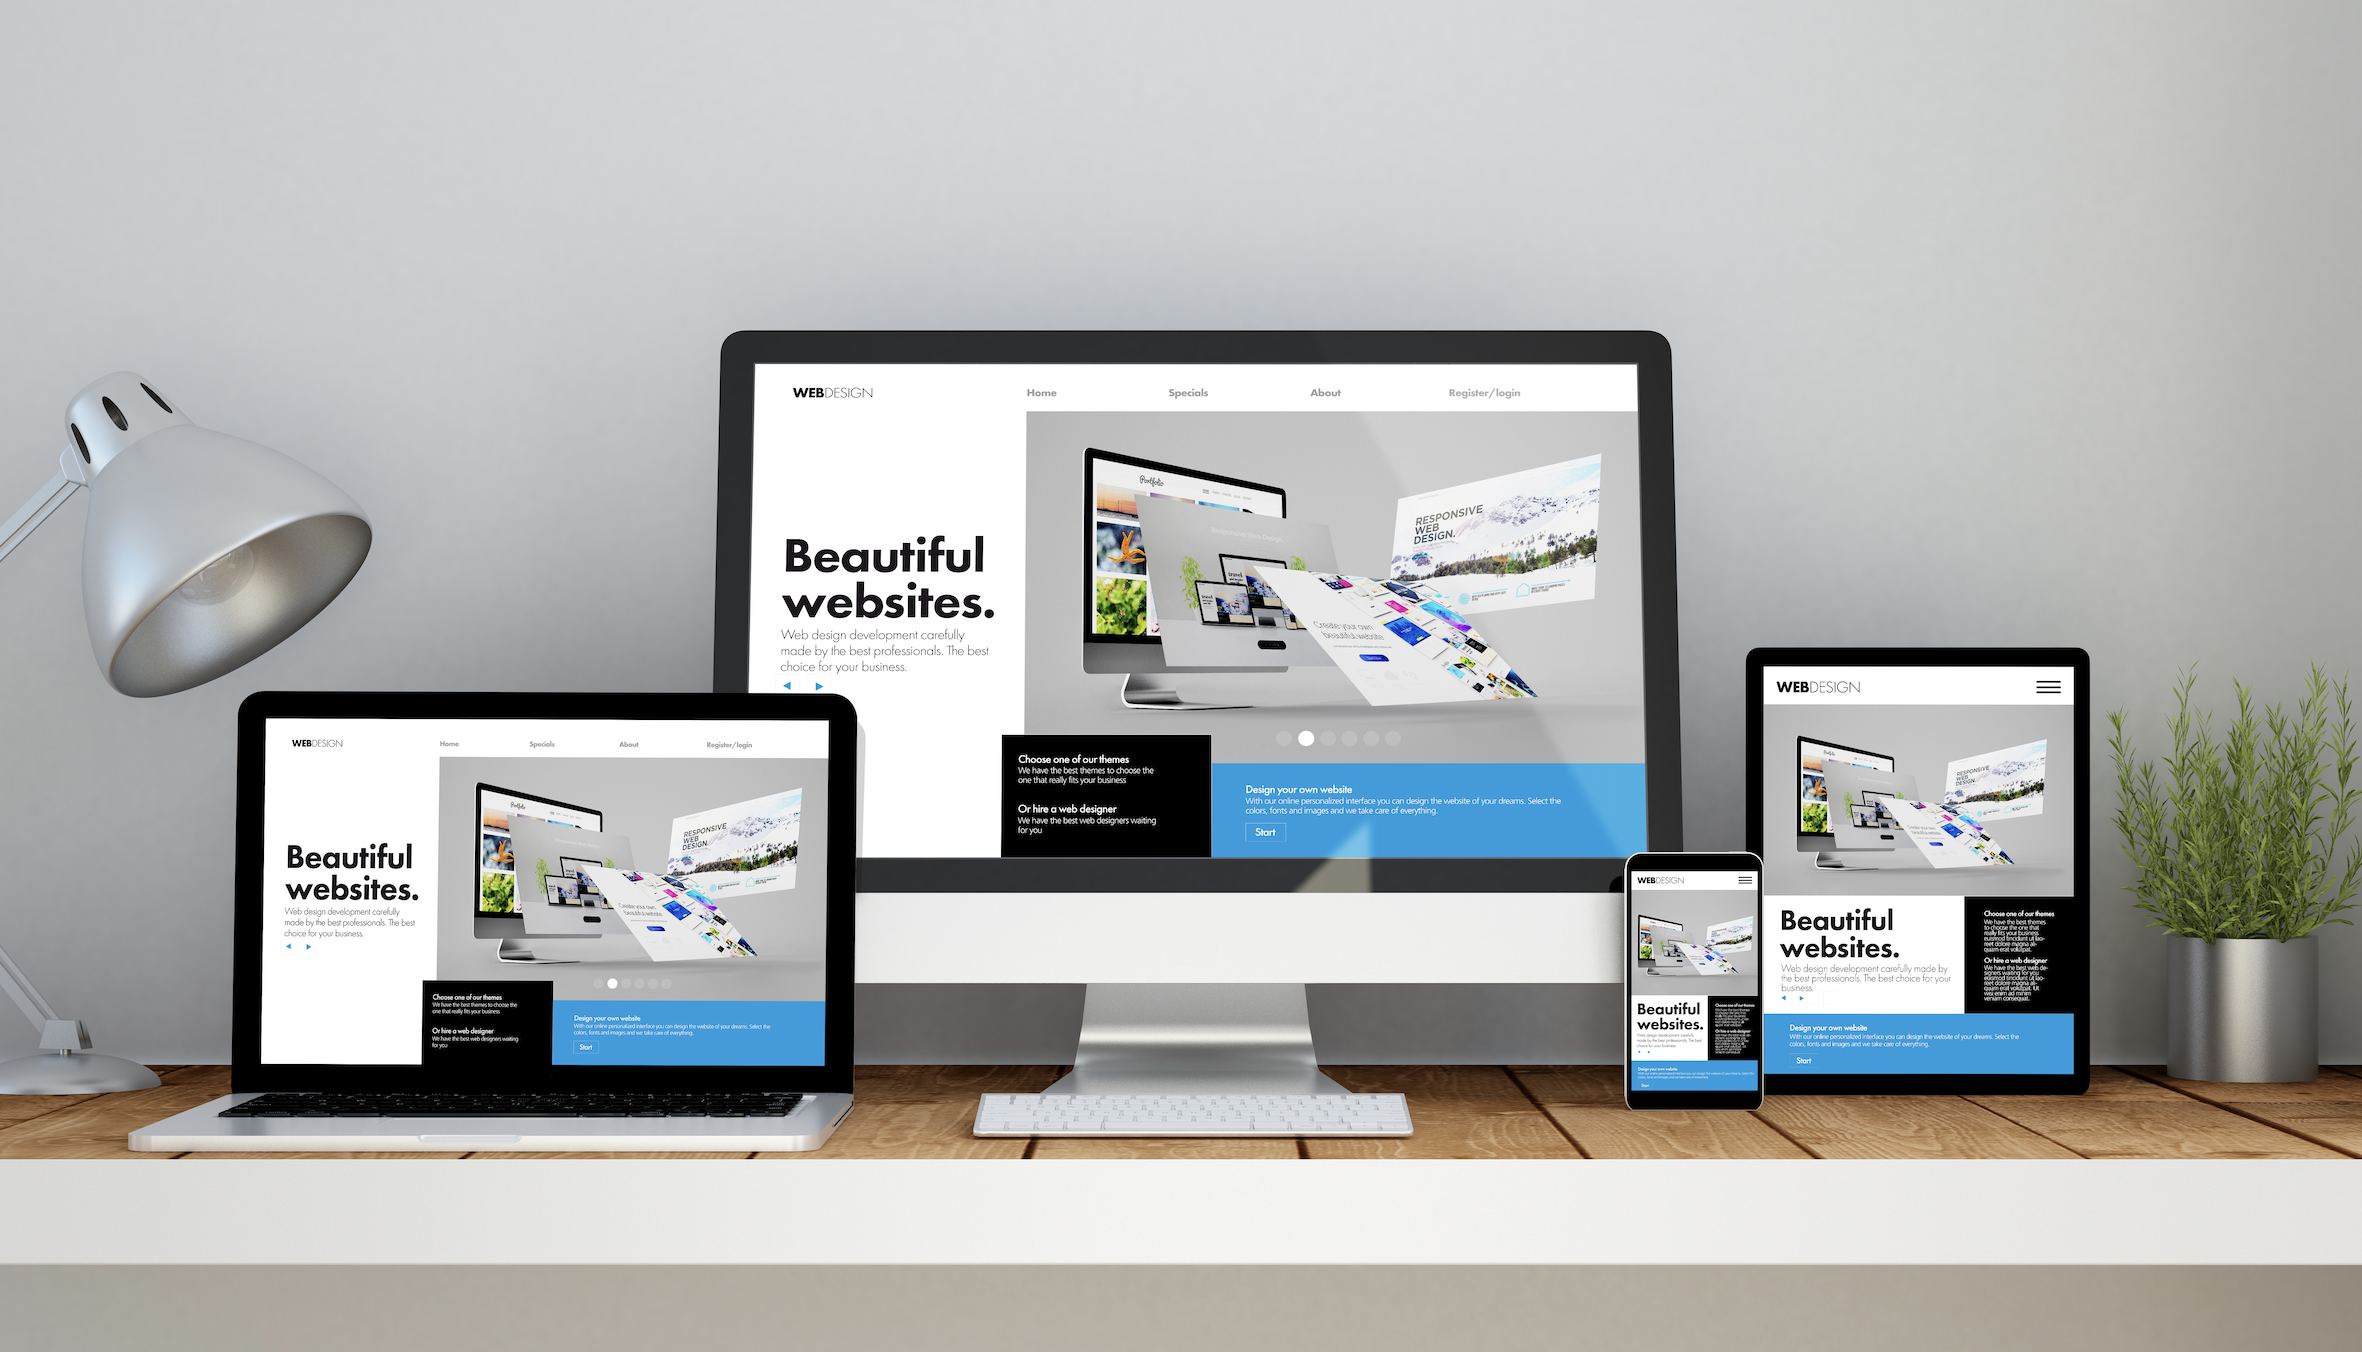 Responsive Website Designing using CSS Media Queries on all kinds of devices